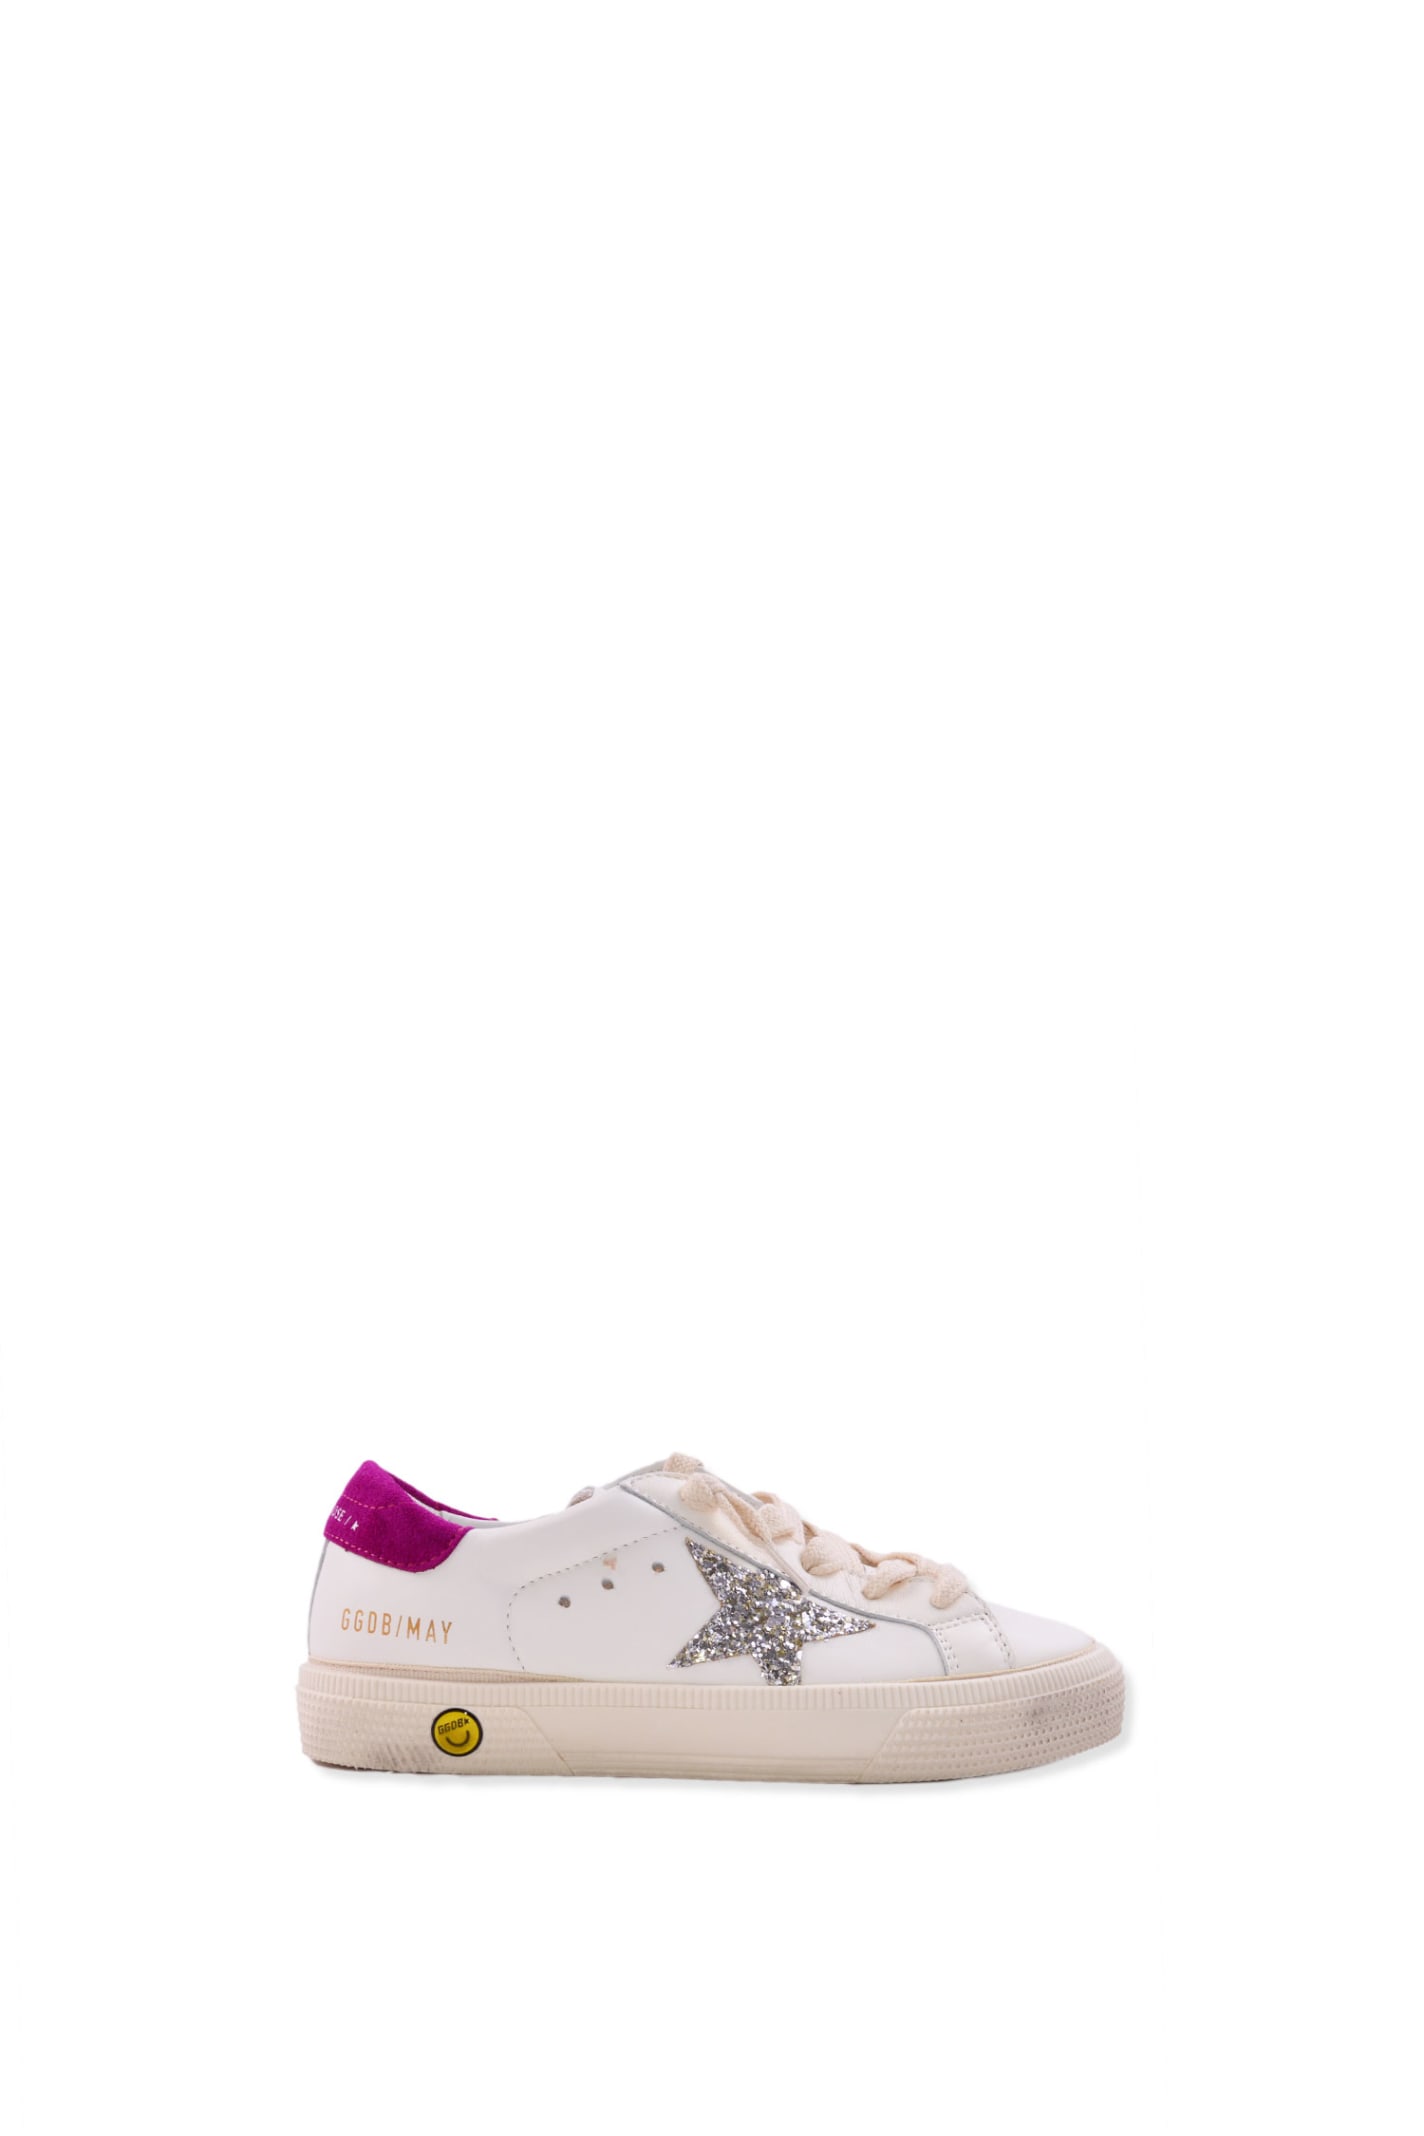 Golden Goose Leather Sneakers